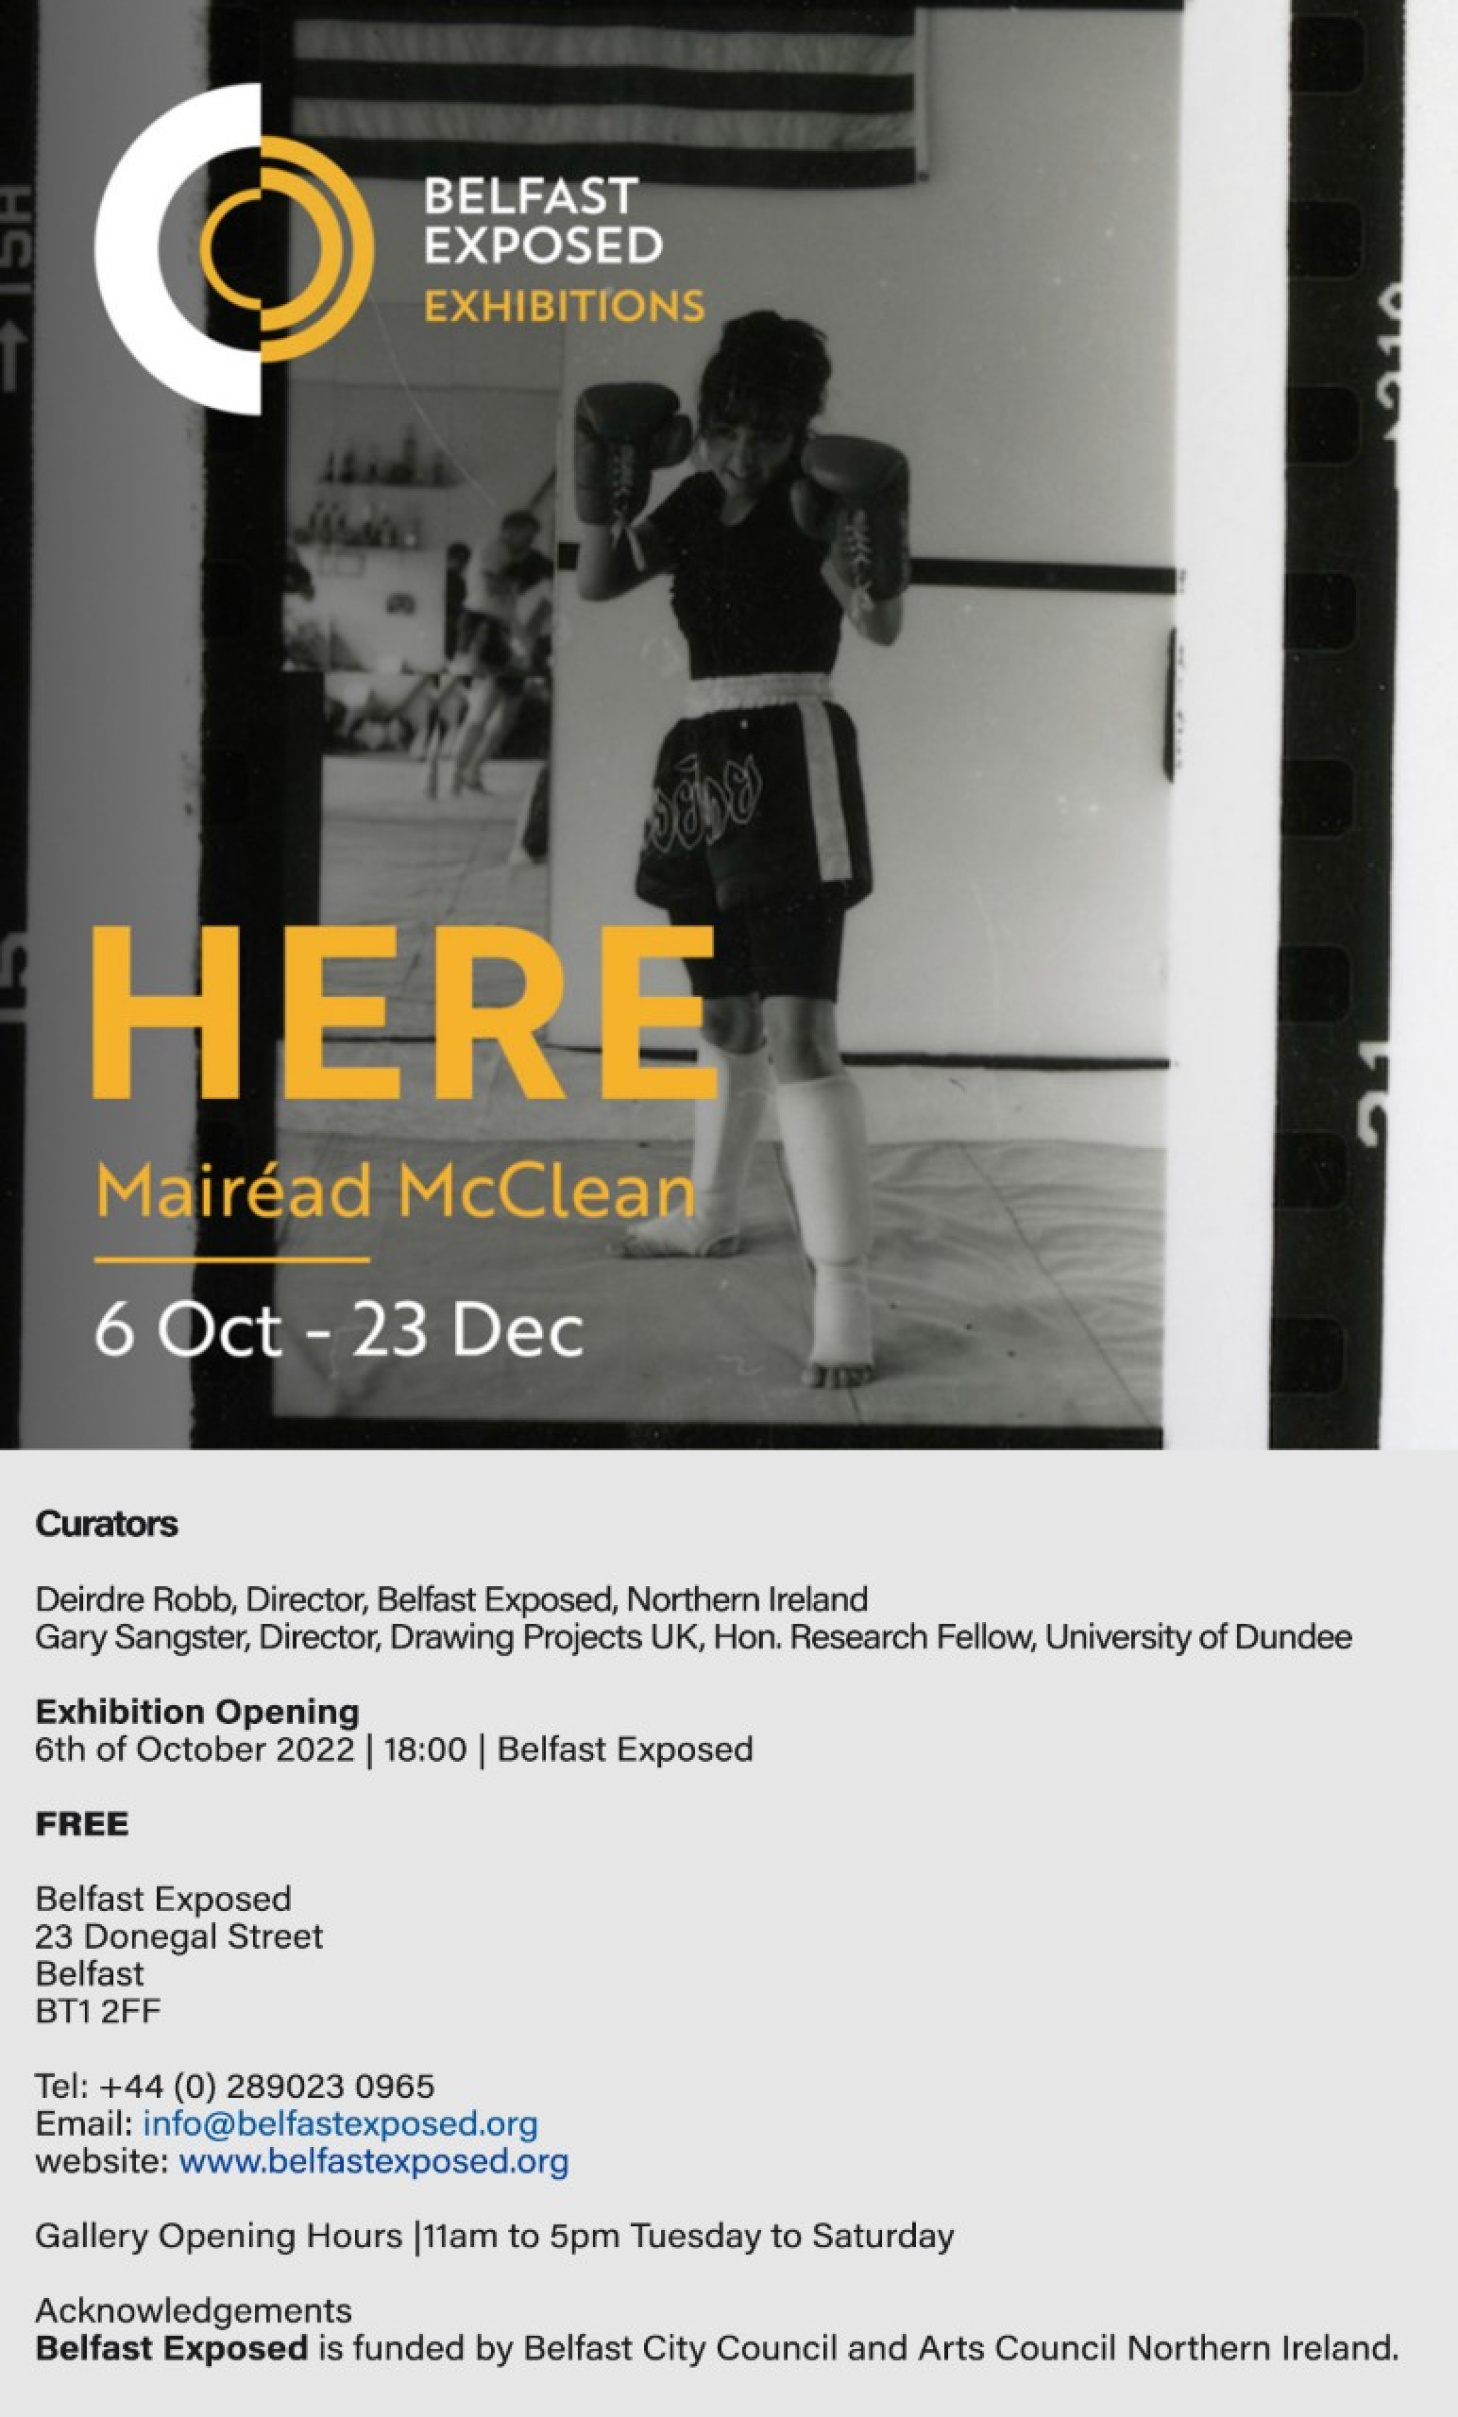 Poster for Mairead McClean, Belfast Exposed exhibition, November 2022